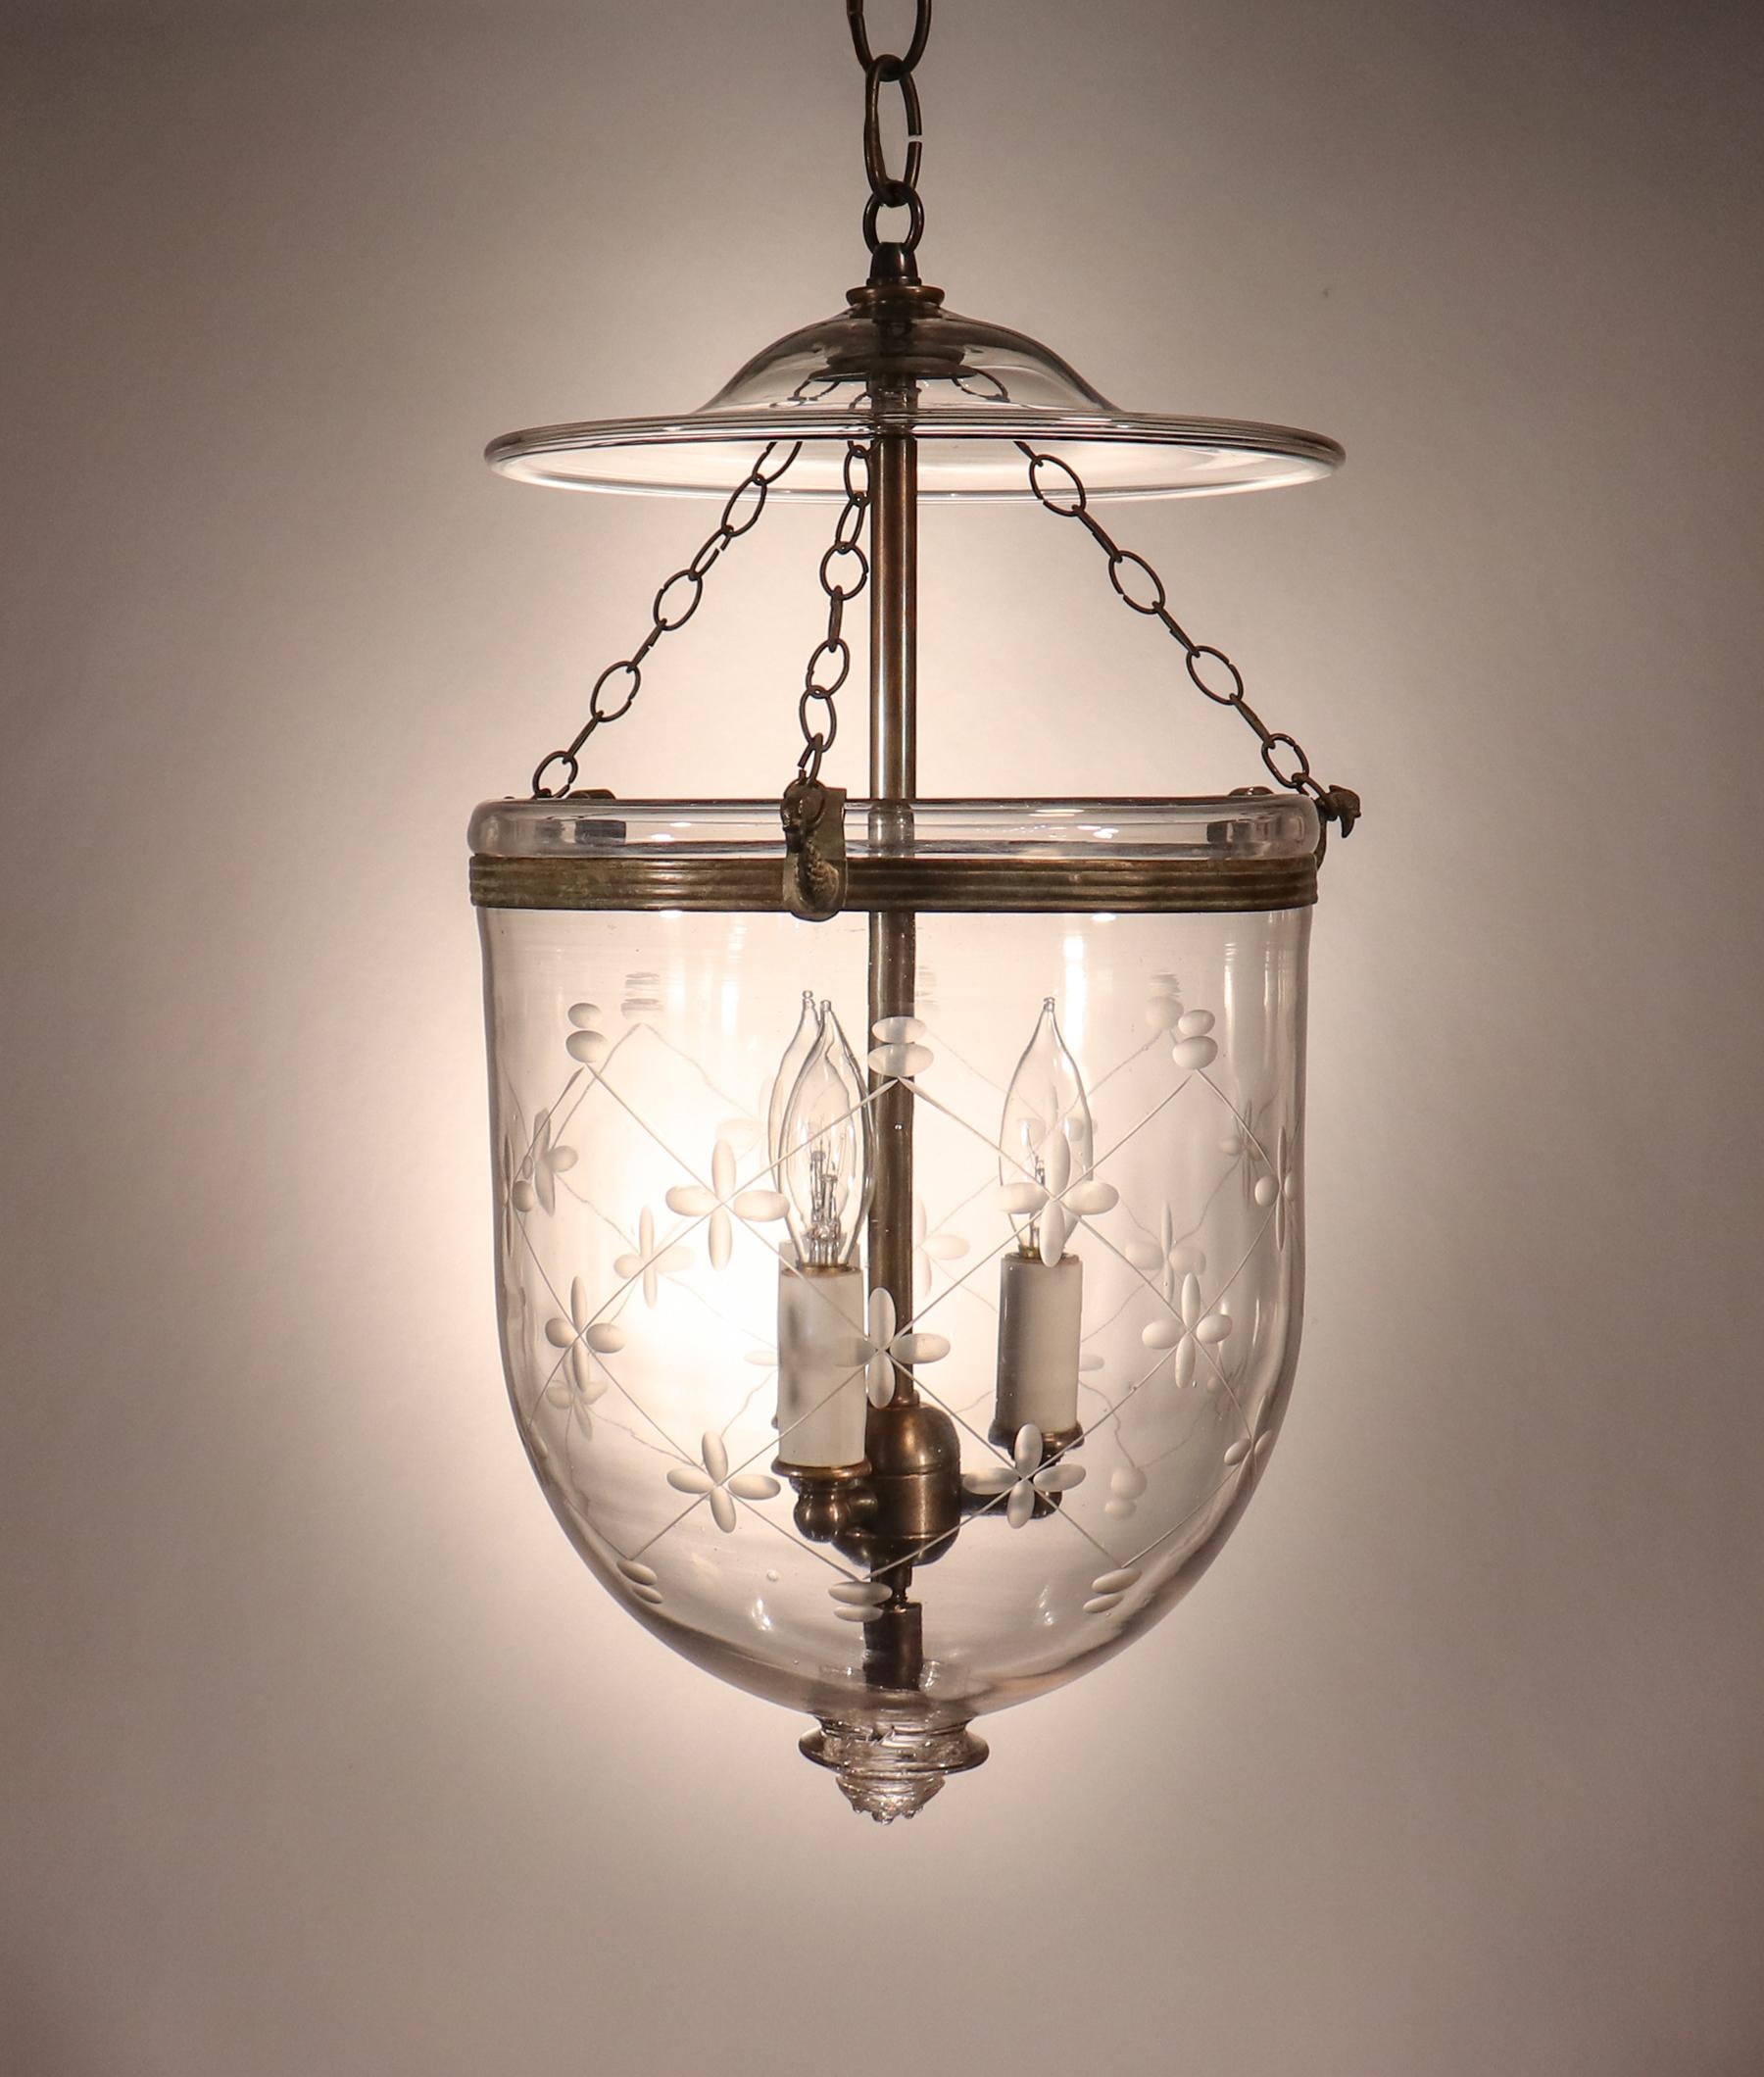 A charming English bell jar lantern, circa 1870, with its original rolled brass band and chains. The quality of the lantern's handblown glass is excellent, with tiny, desirable air bubbles and an attractive glass pontil. The pendant's etched trellis